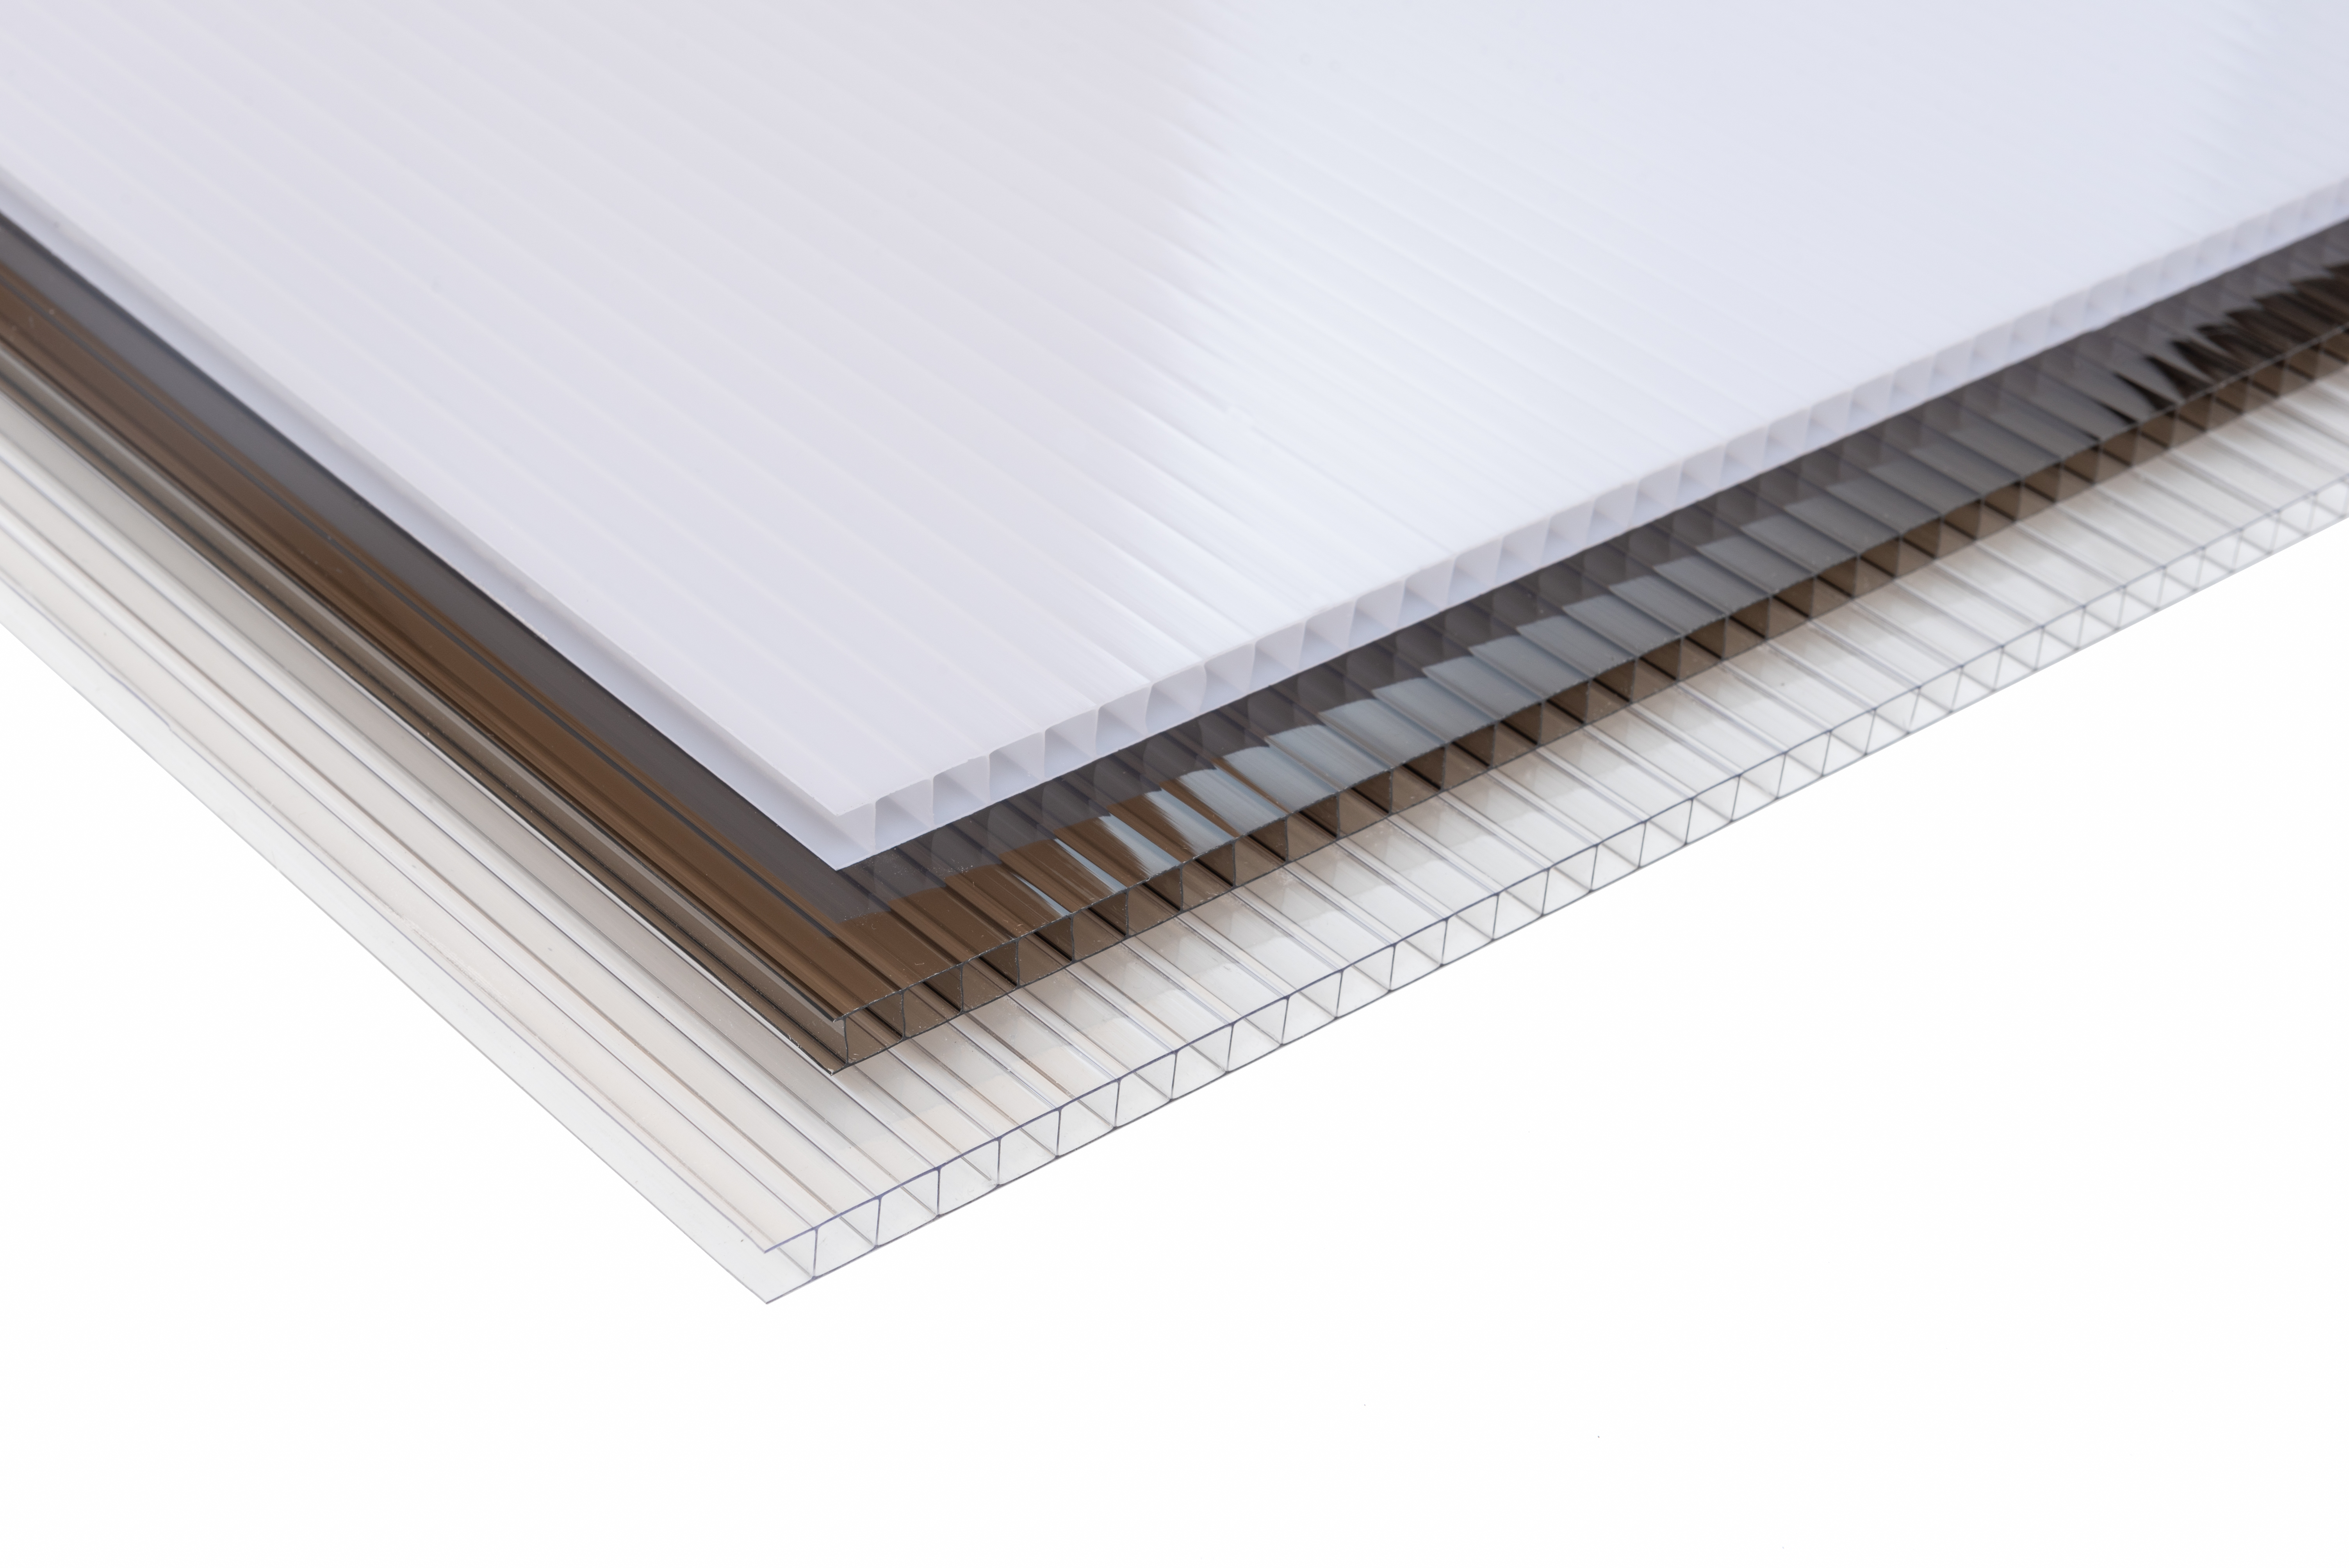 Multiwall Polycarbonate Glazing Sheets - Standard Rectangles